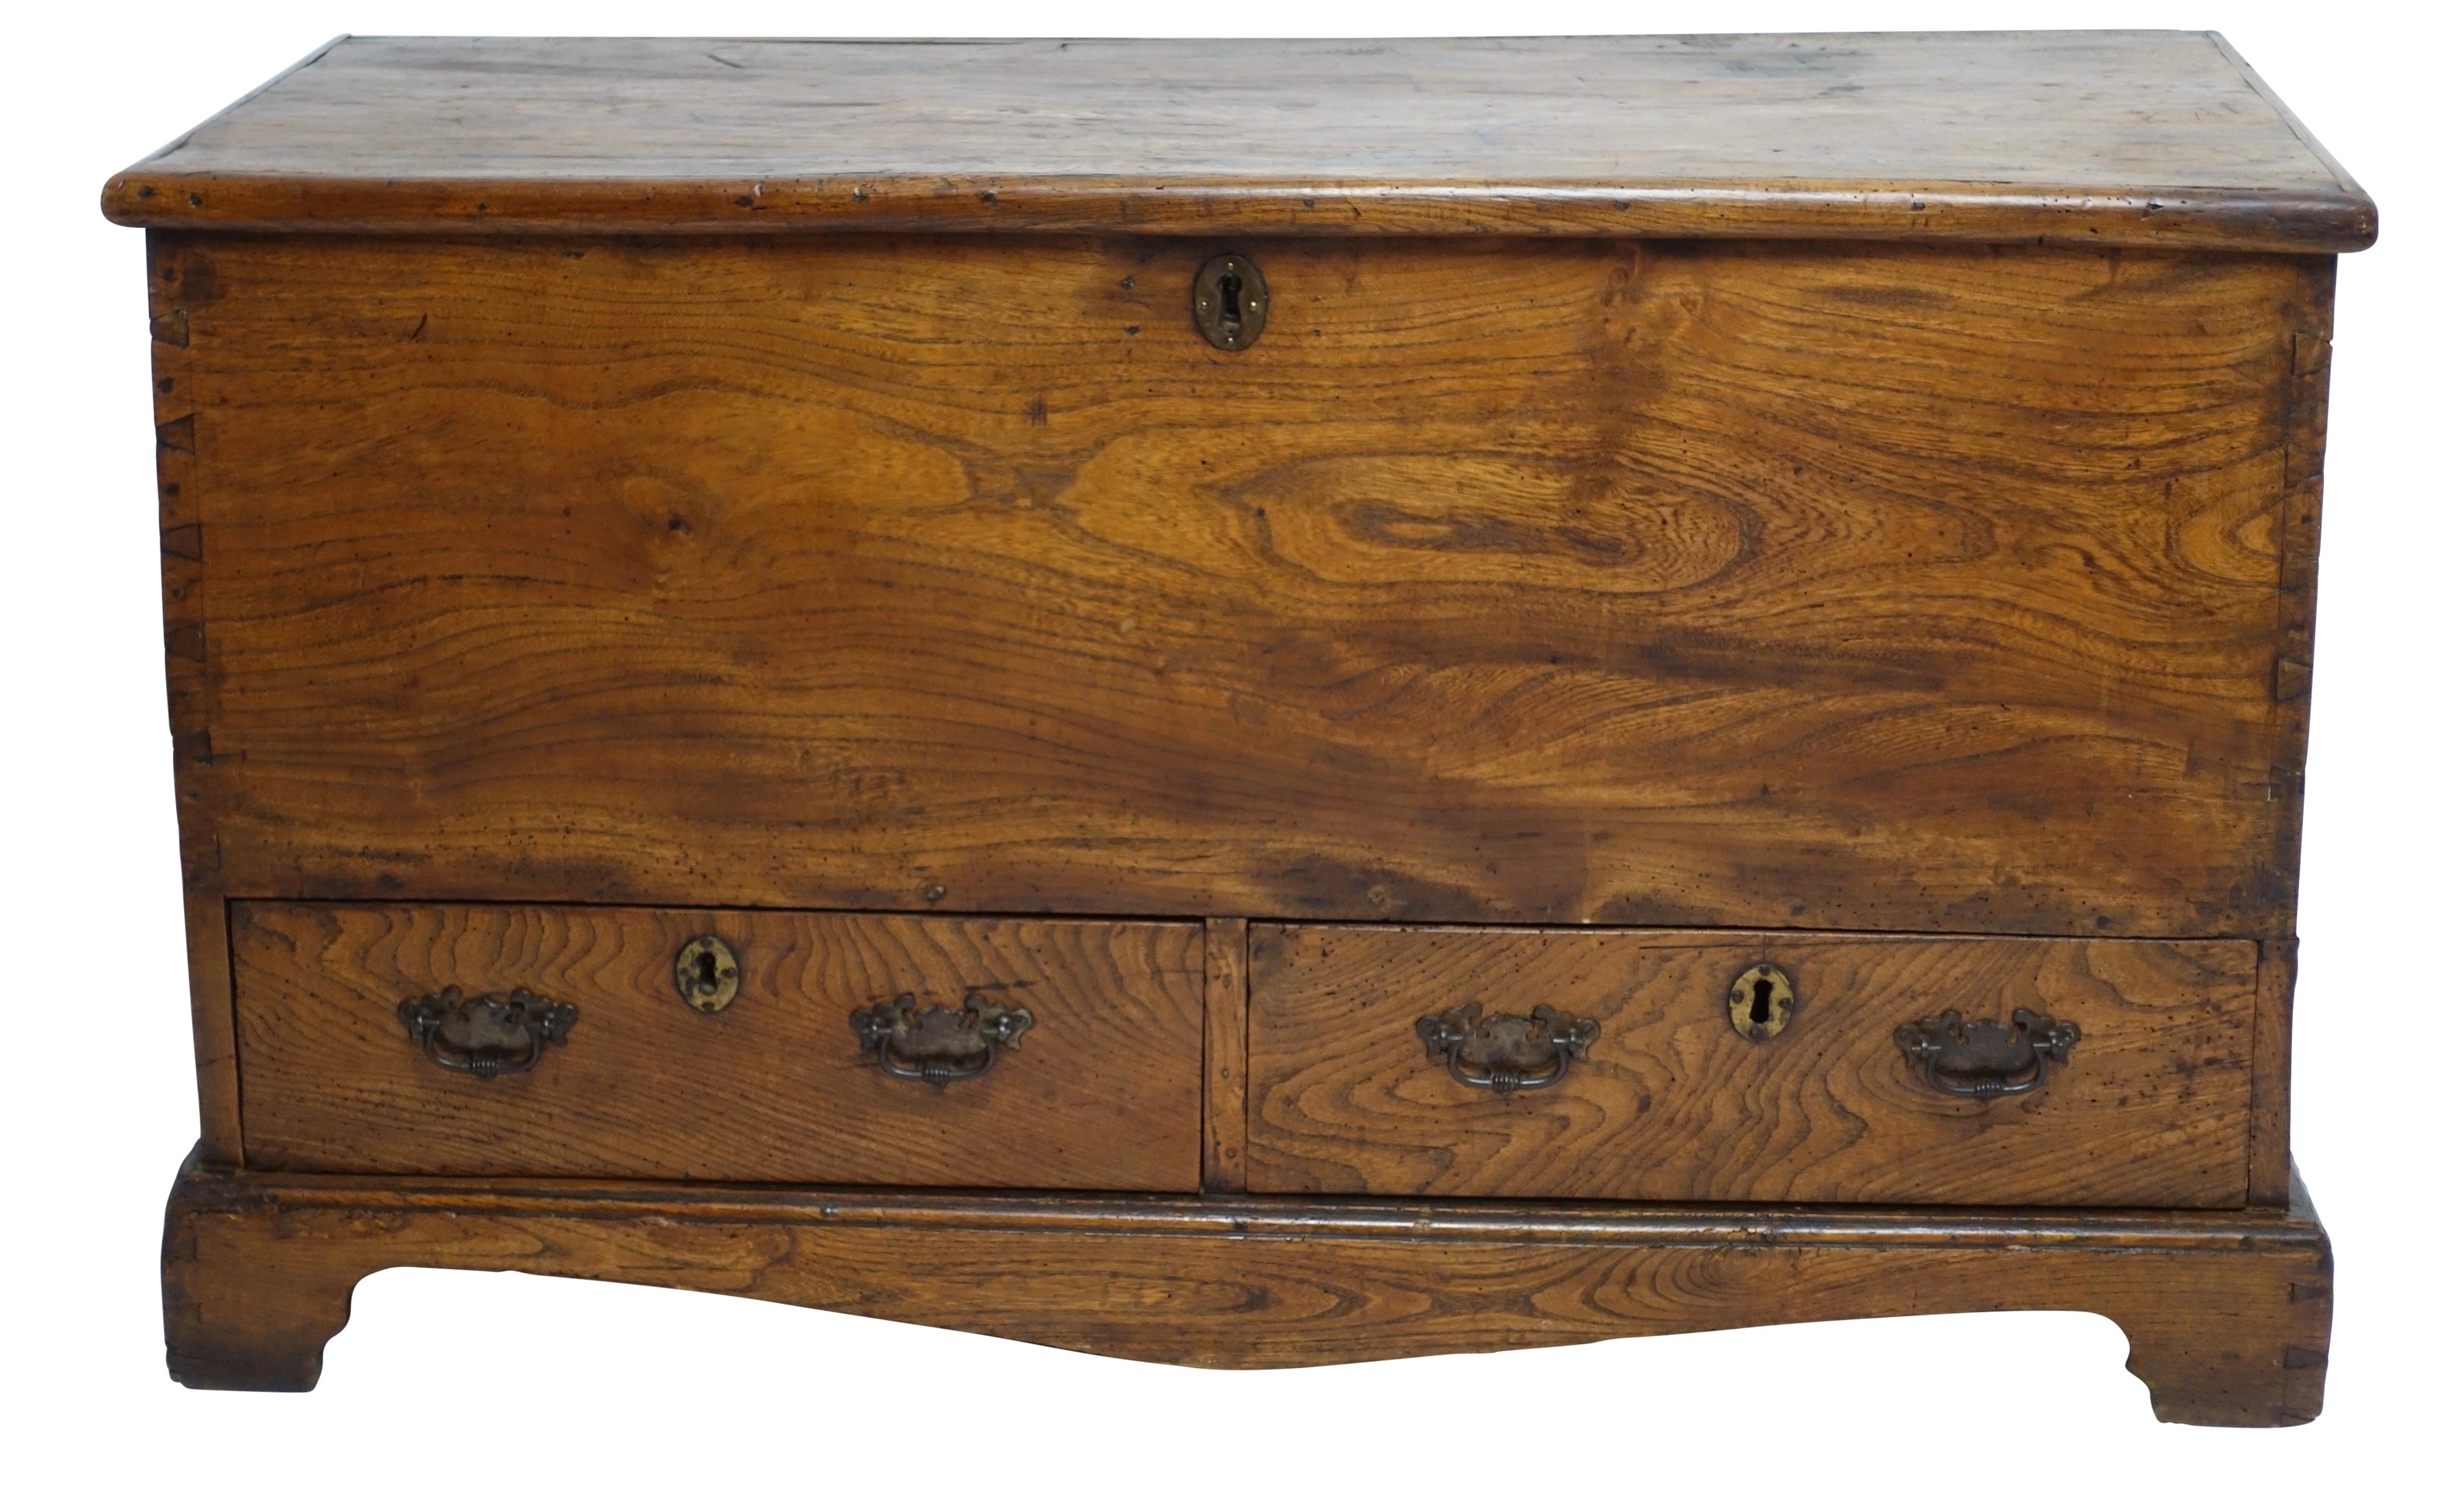 English yew wood trunk with two drawers, having lovely dovetailed corners and original brass escutcheons standing on a shapely base with bracket feet. England, circa 1800.